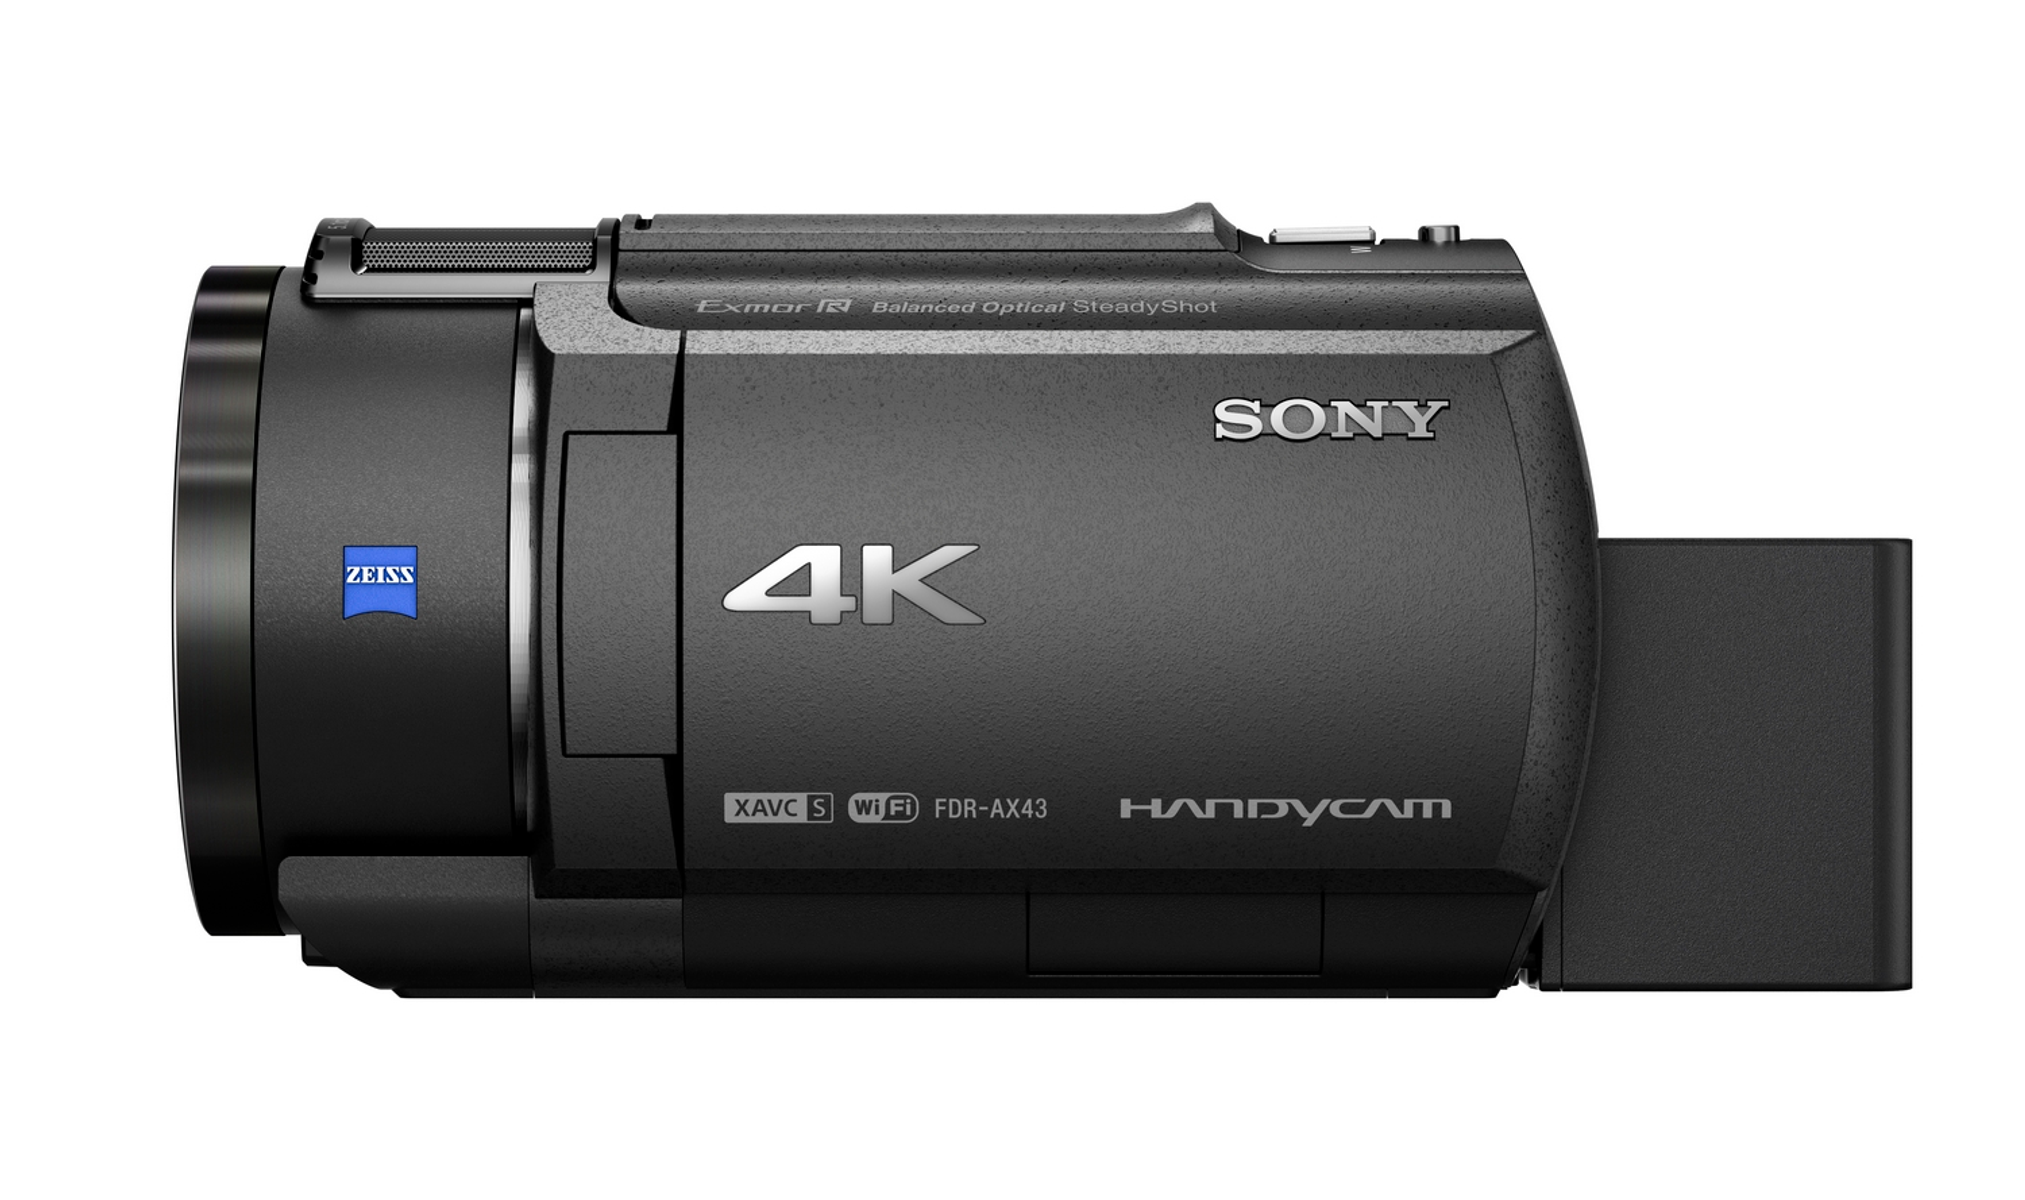 Camcorder SONY 20xopt. 4K Zoom FDR-AX , 43